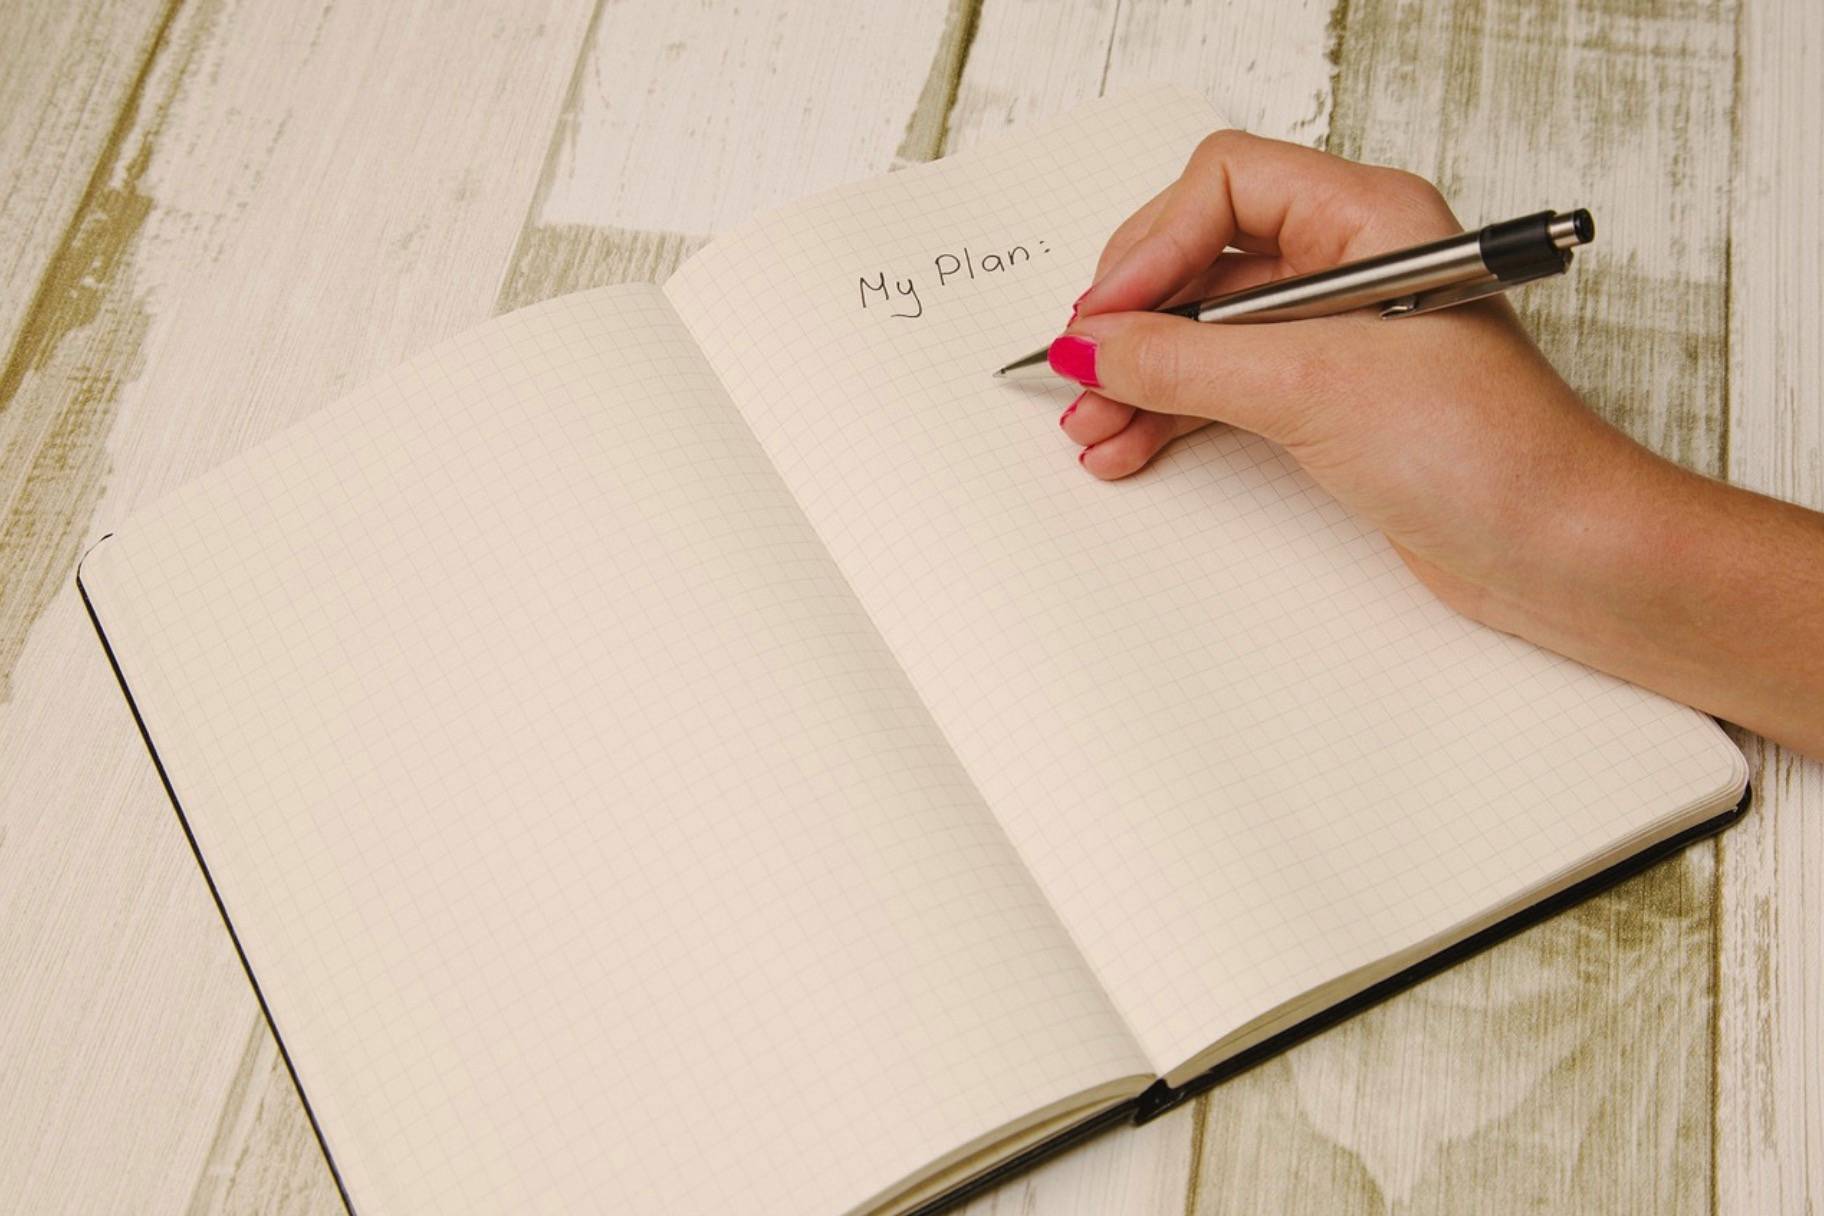 a woman writing in a journal, at the top of the page it says "my plan"